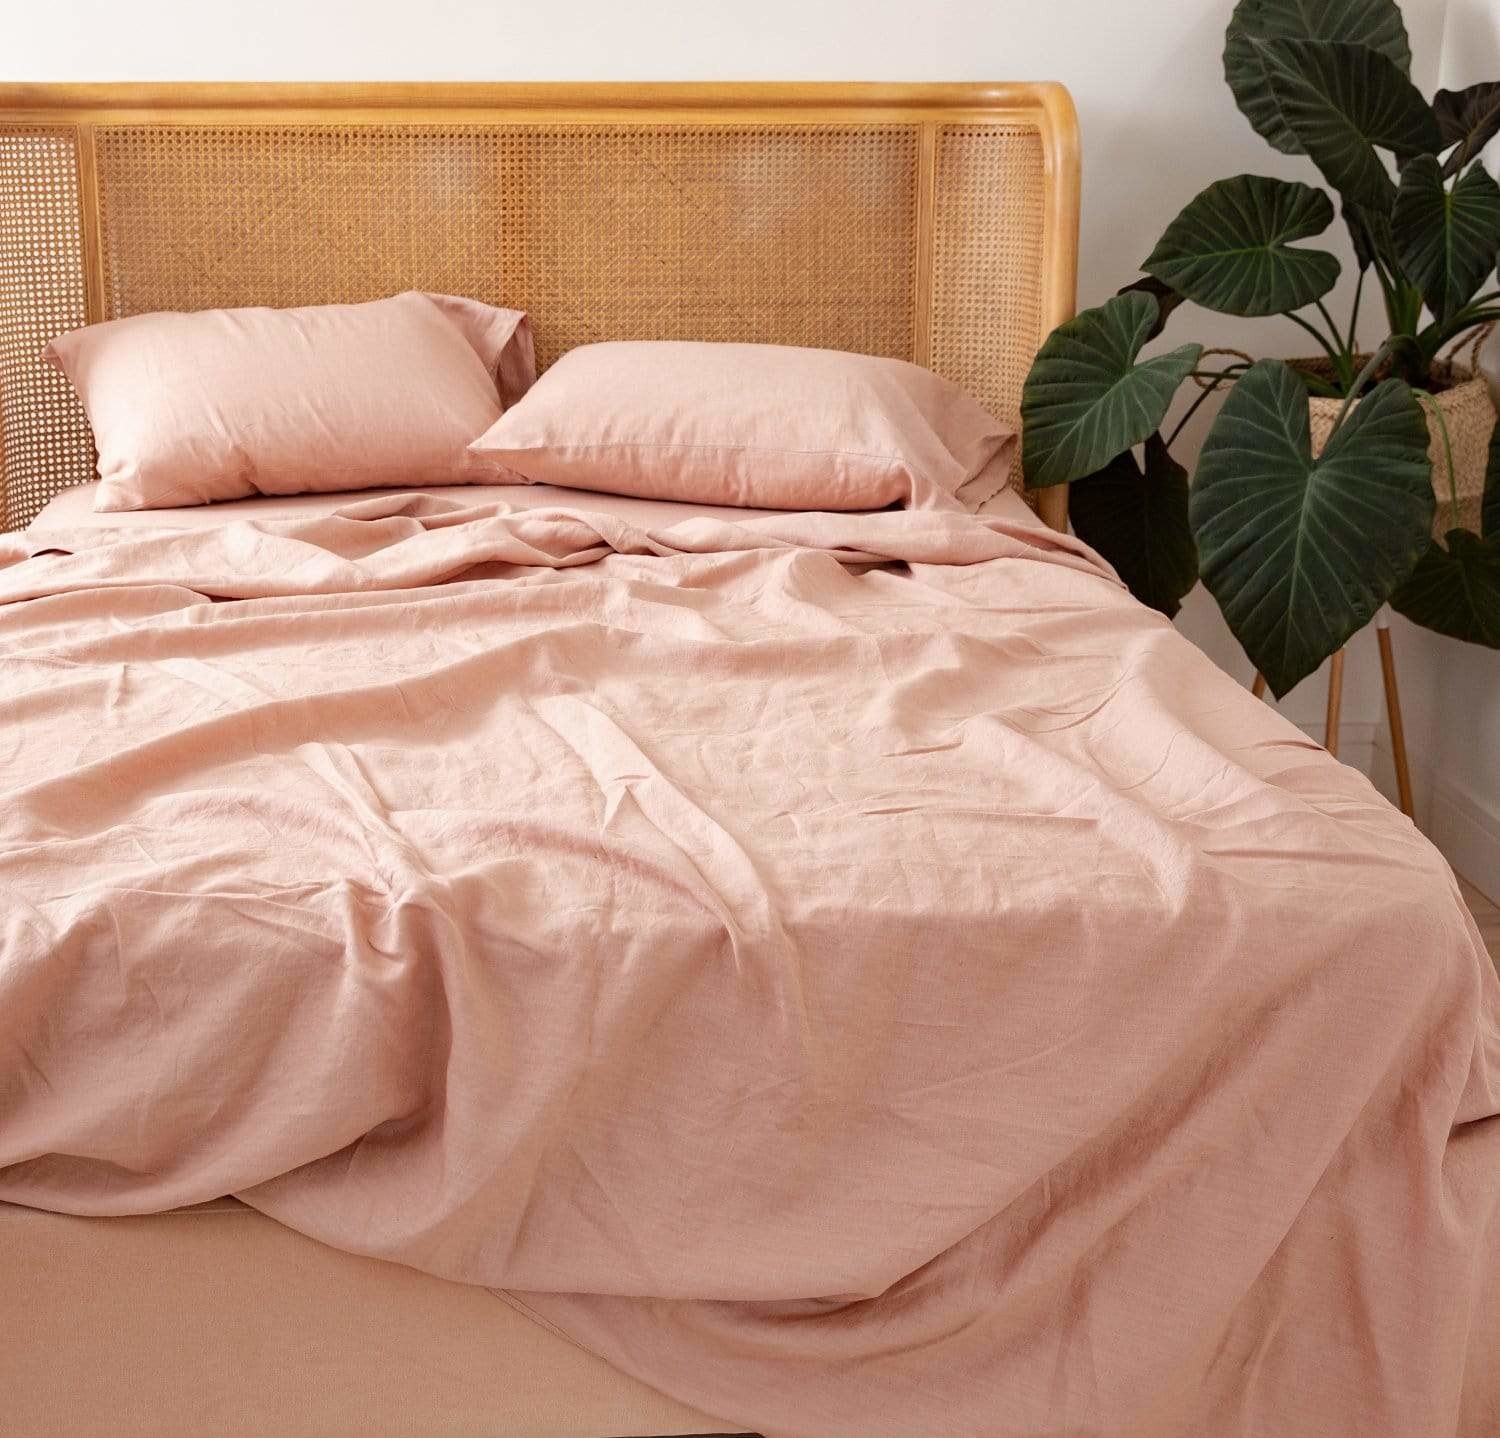 pink linen sheets on a bed